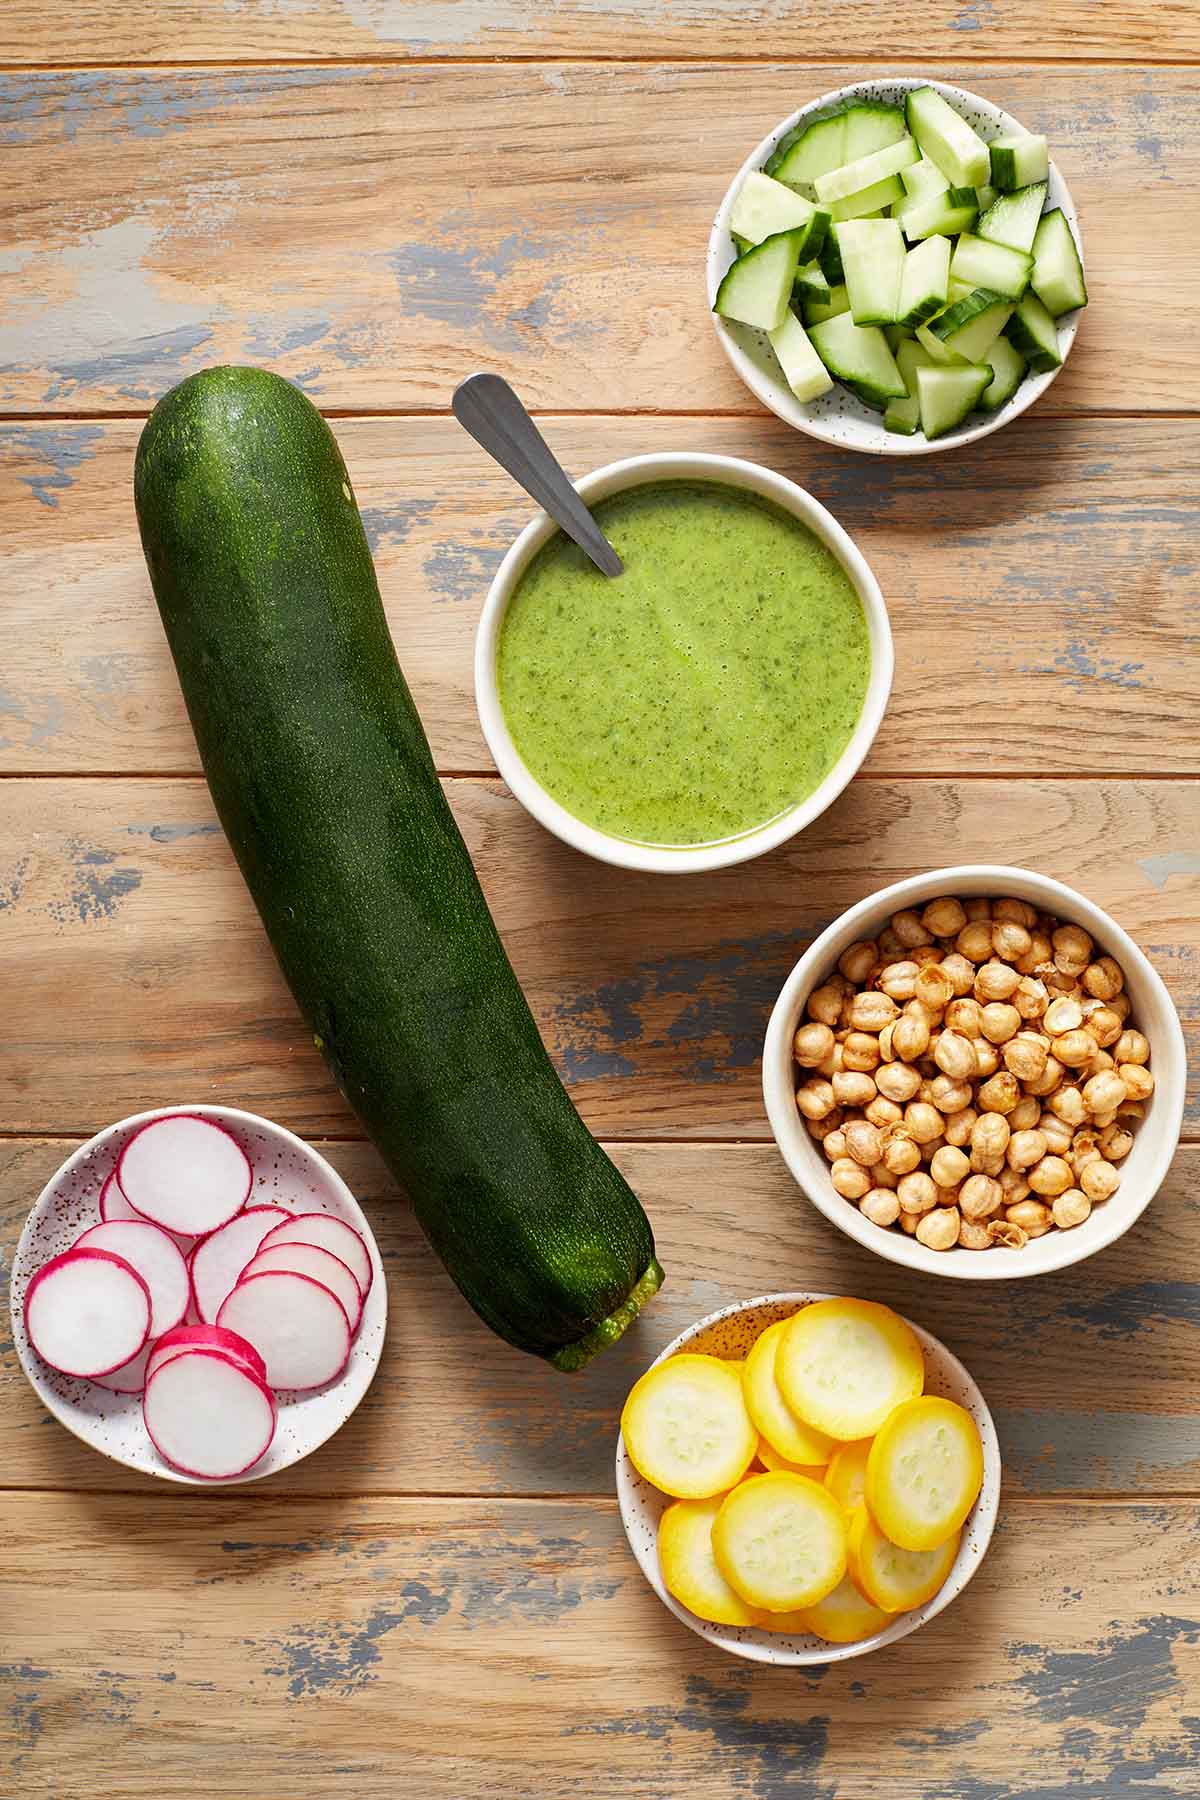 Ingredients to make zucchini noodle bowls arranged on a wooden table.